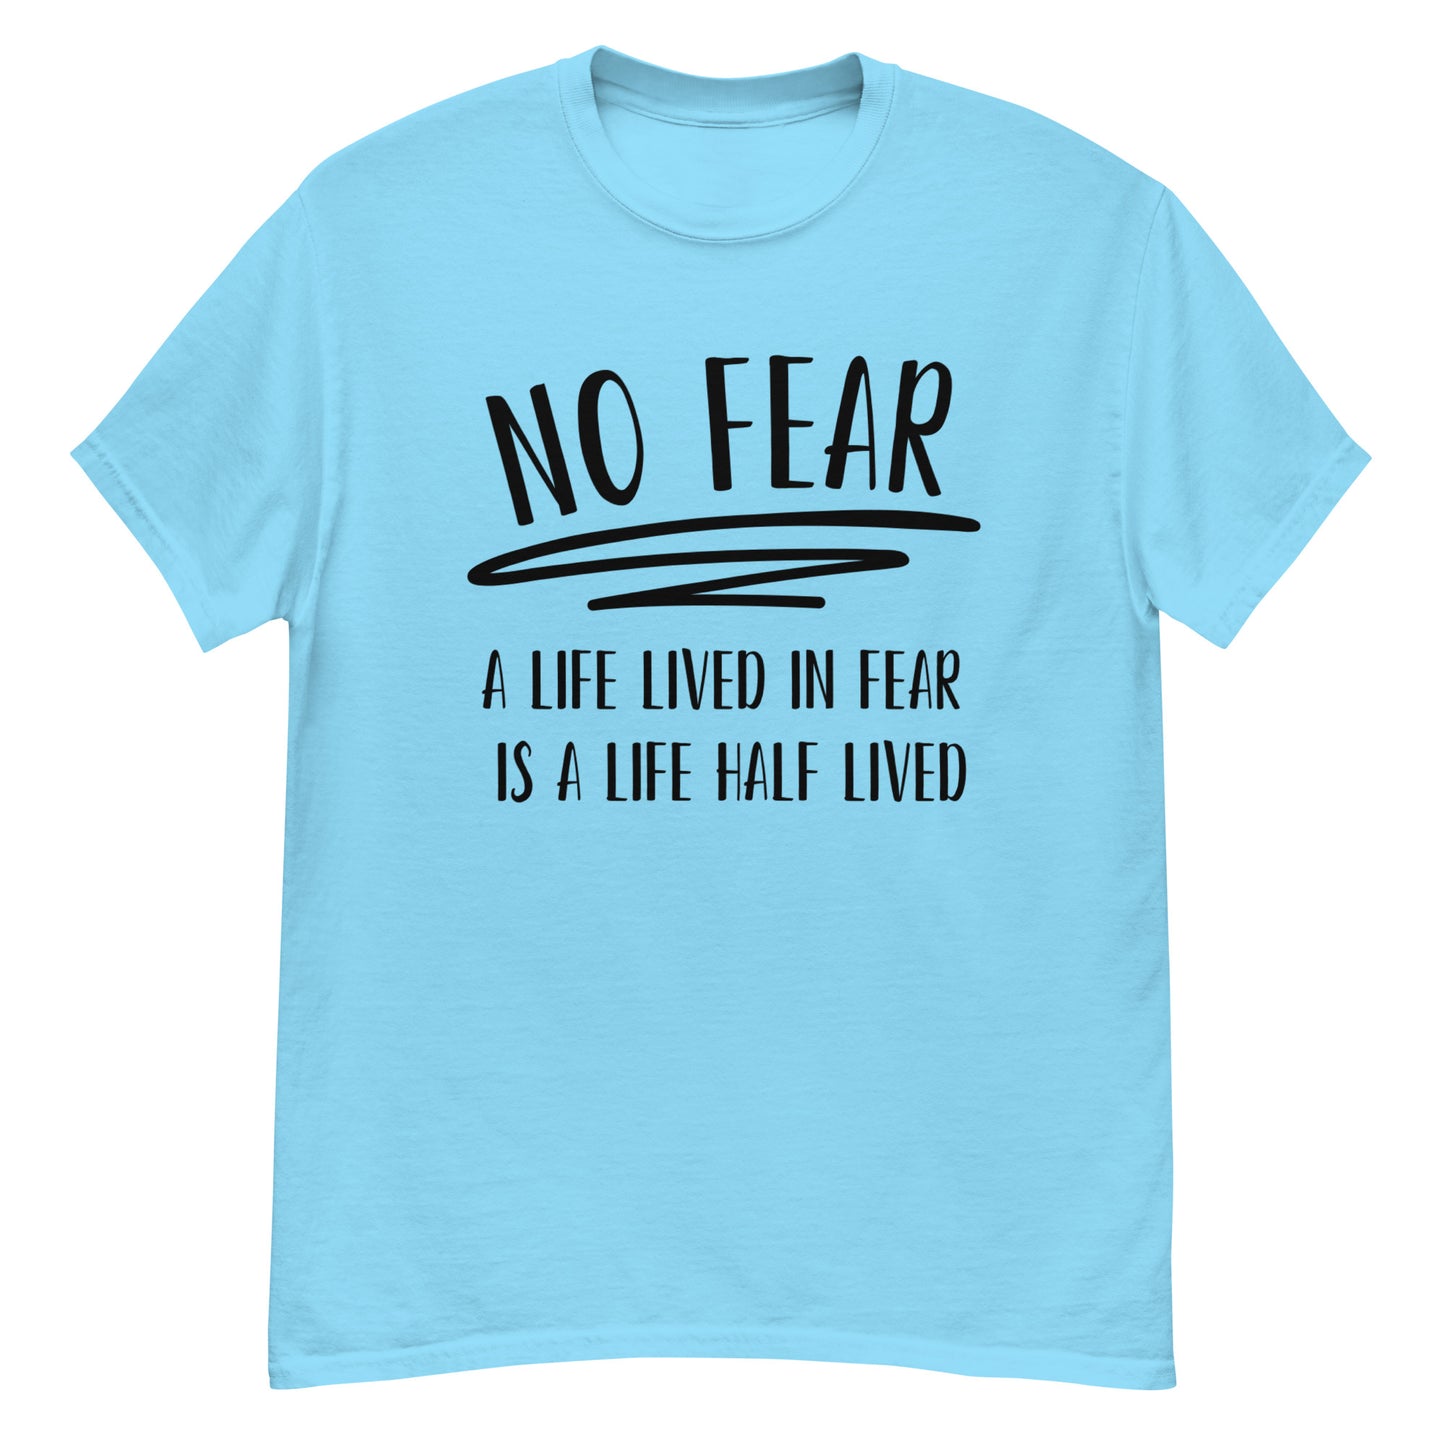 No FEAR - classic tee